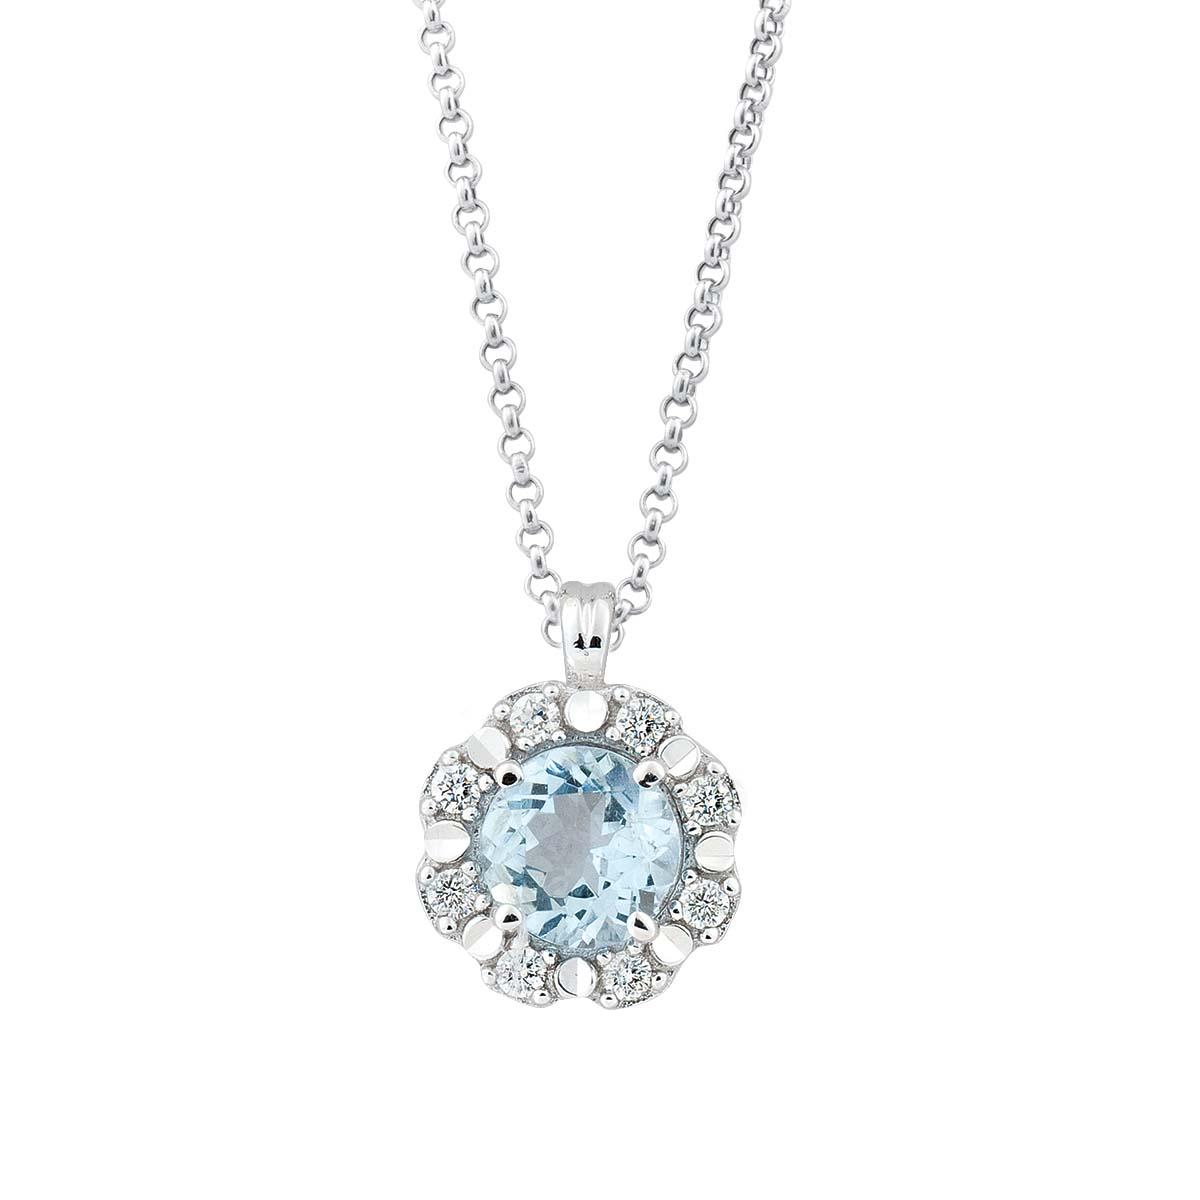 18 kt white gold necklace with aquamarine and diamonds - CD338/AC-4B